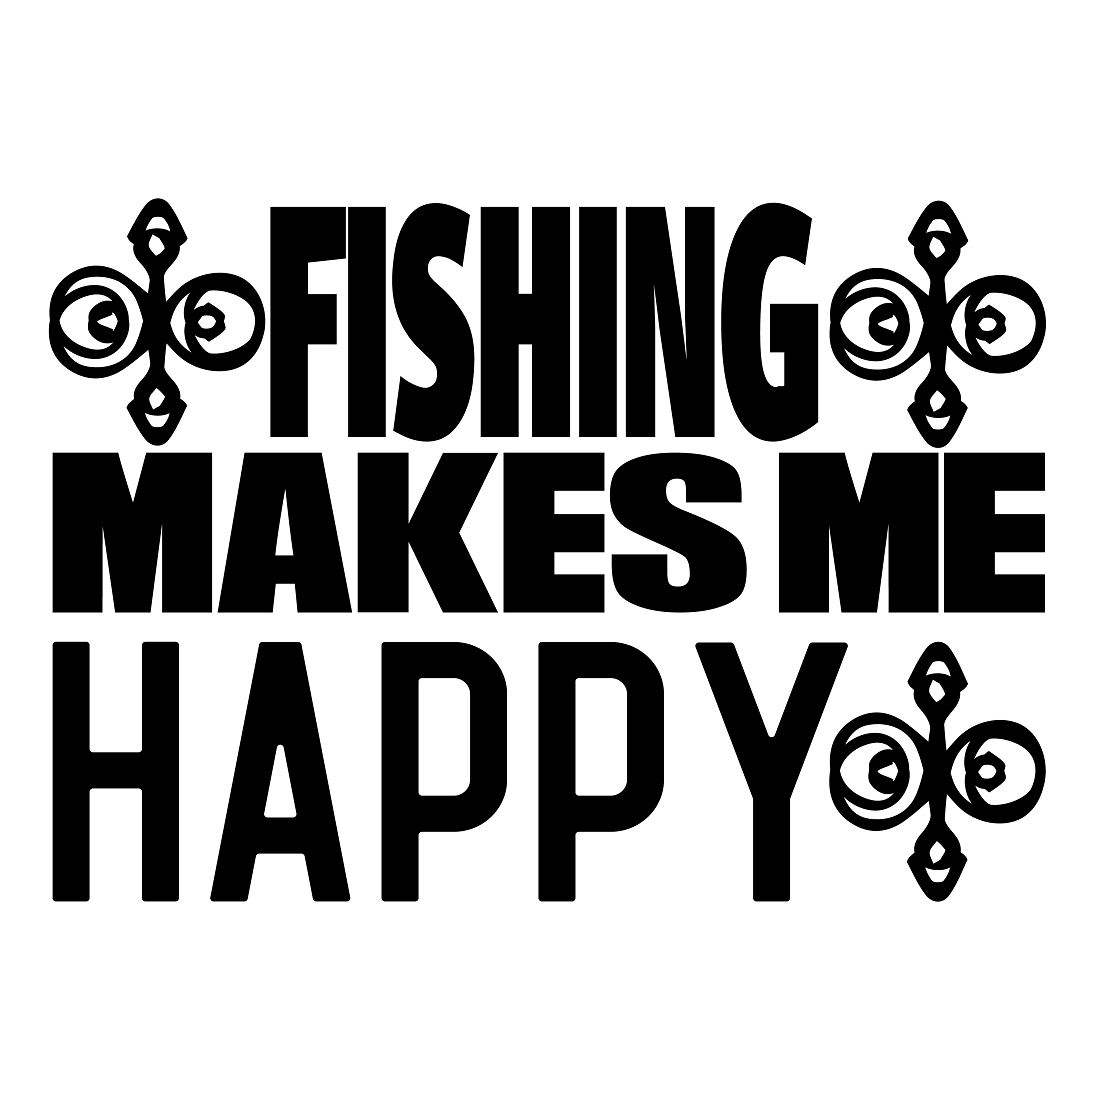 Fishing makes me happy preview image.